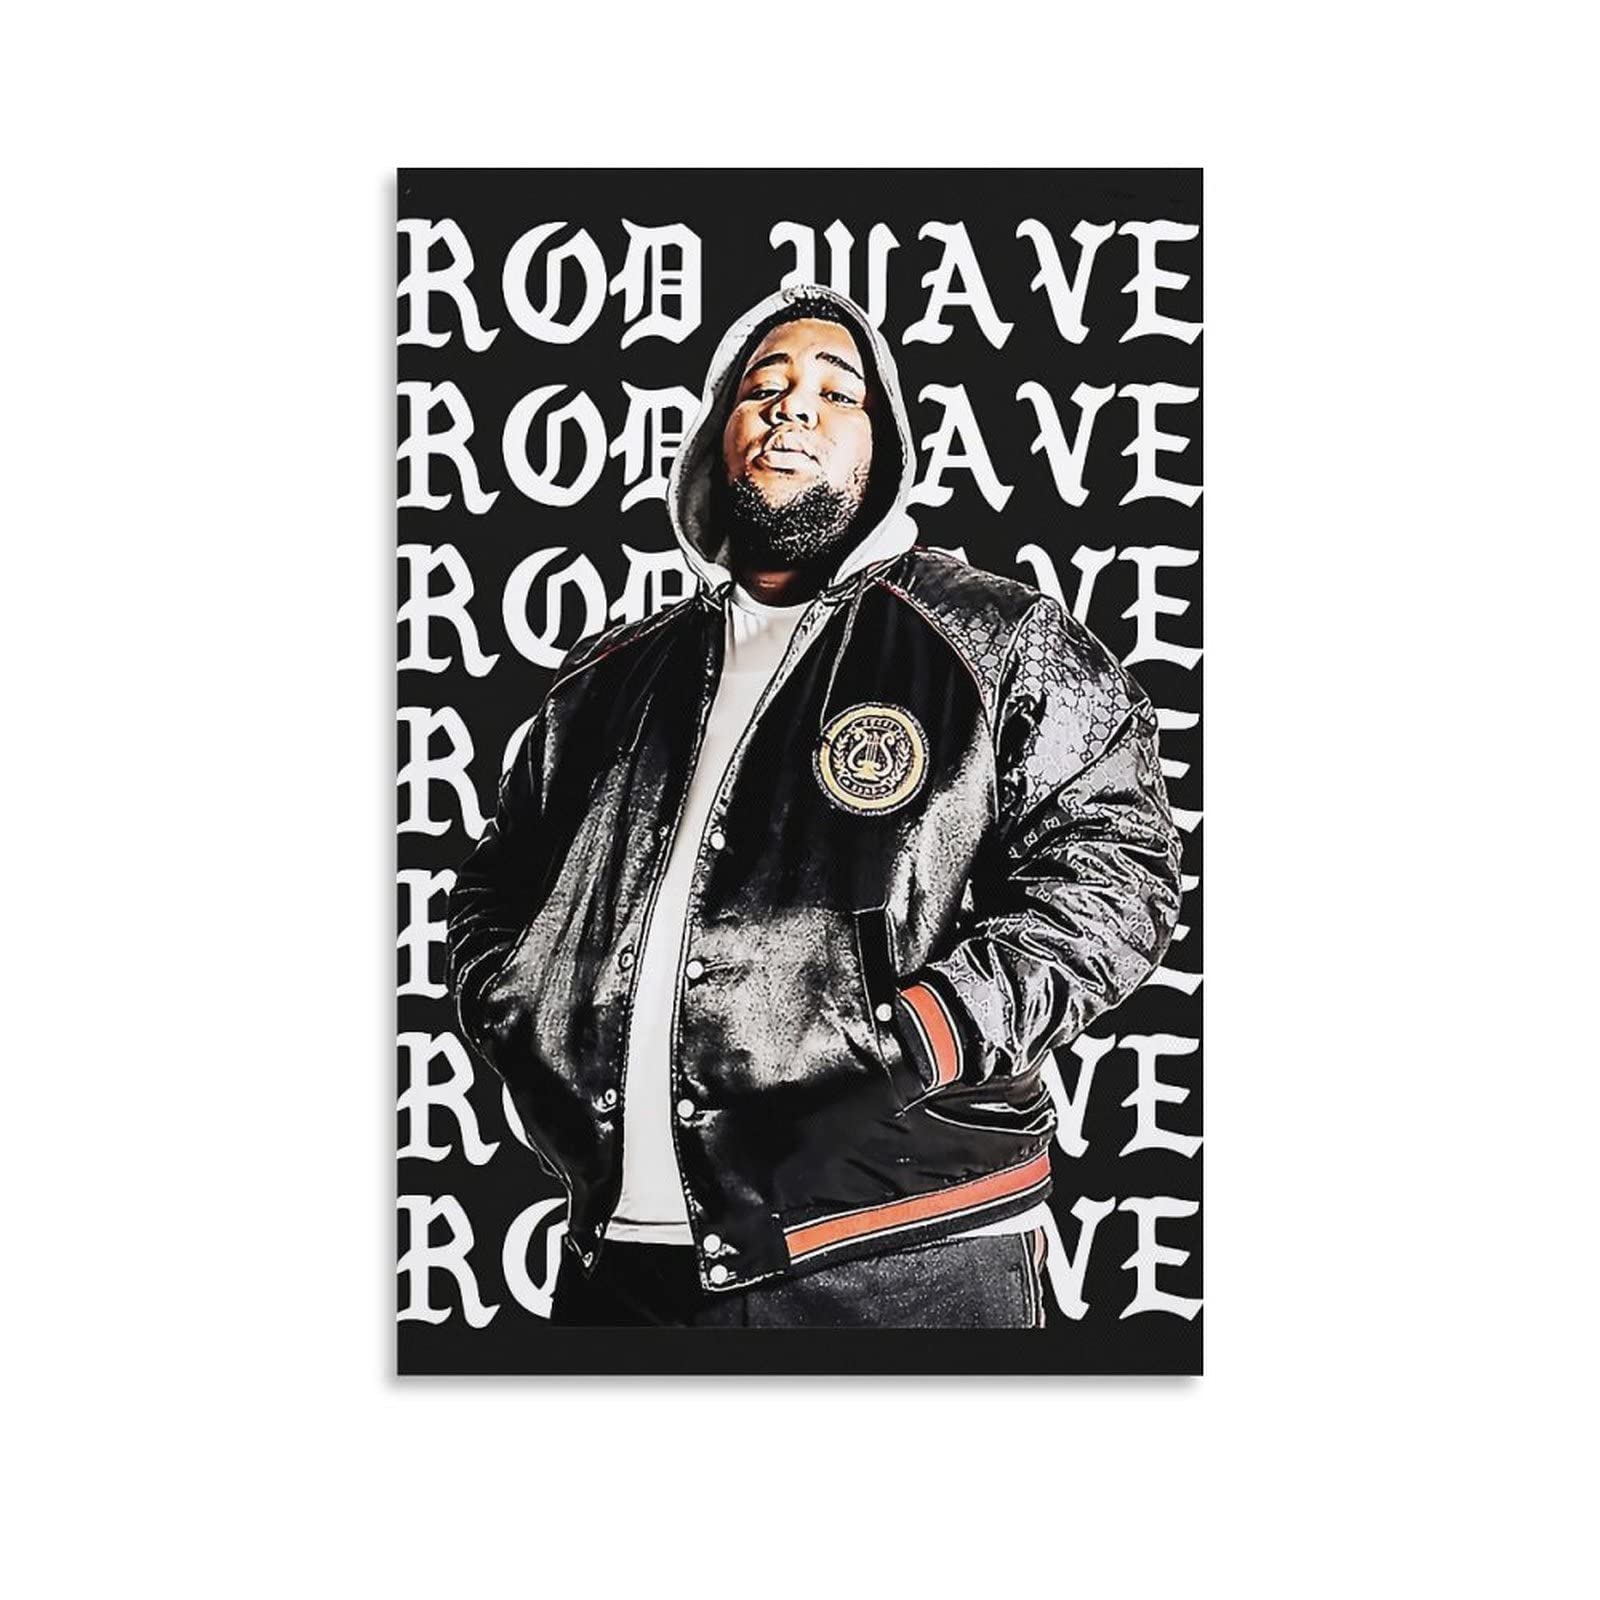 JINHUA Rapper Rod Wave Music Art Poster Canvas Art Poster And Wall Art Modern Family Bedroom Office Dorm Decor Gift 12x18inch(30x45cm): Posters & Prints